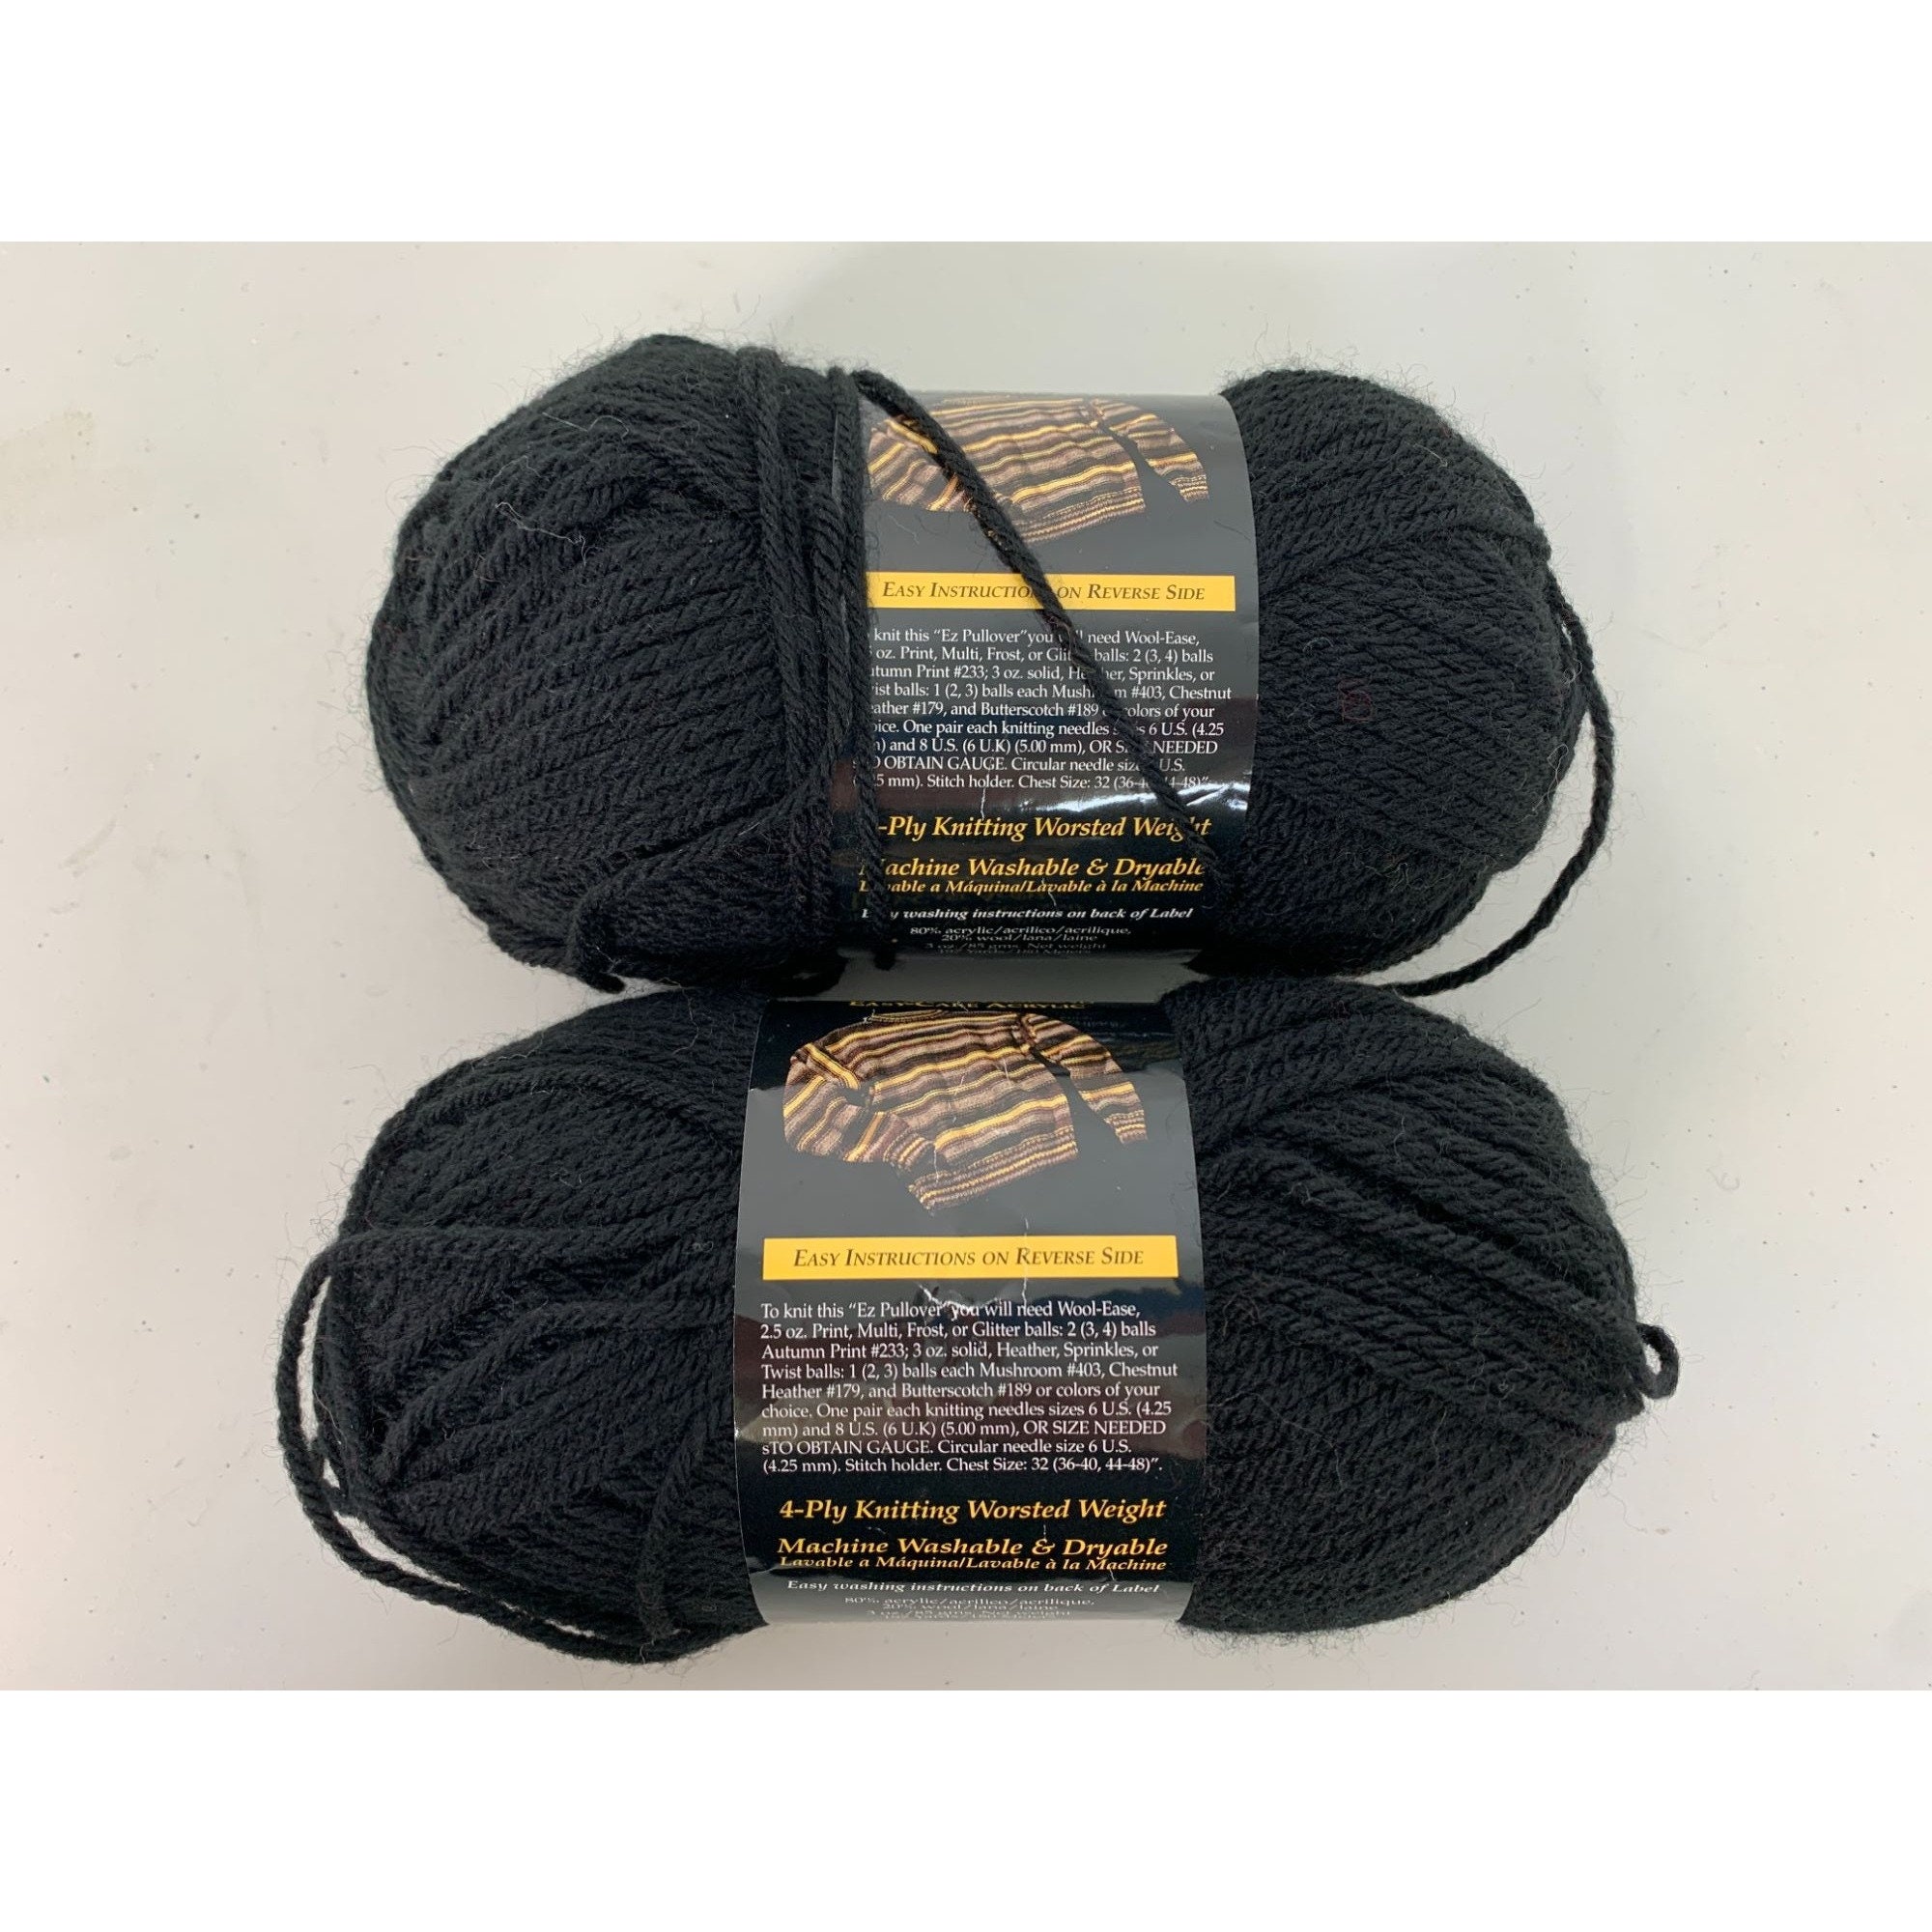 Lion Brand Yarn Wool-ease Worsted Weight Yarn Lamb's Wool 153 3 Oz AT508  Lot of 2 